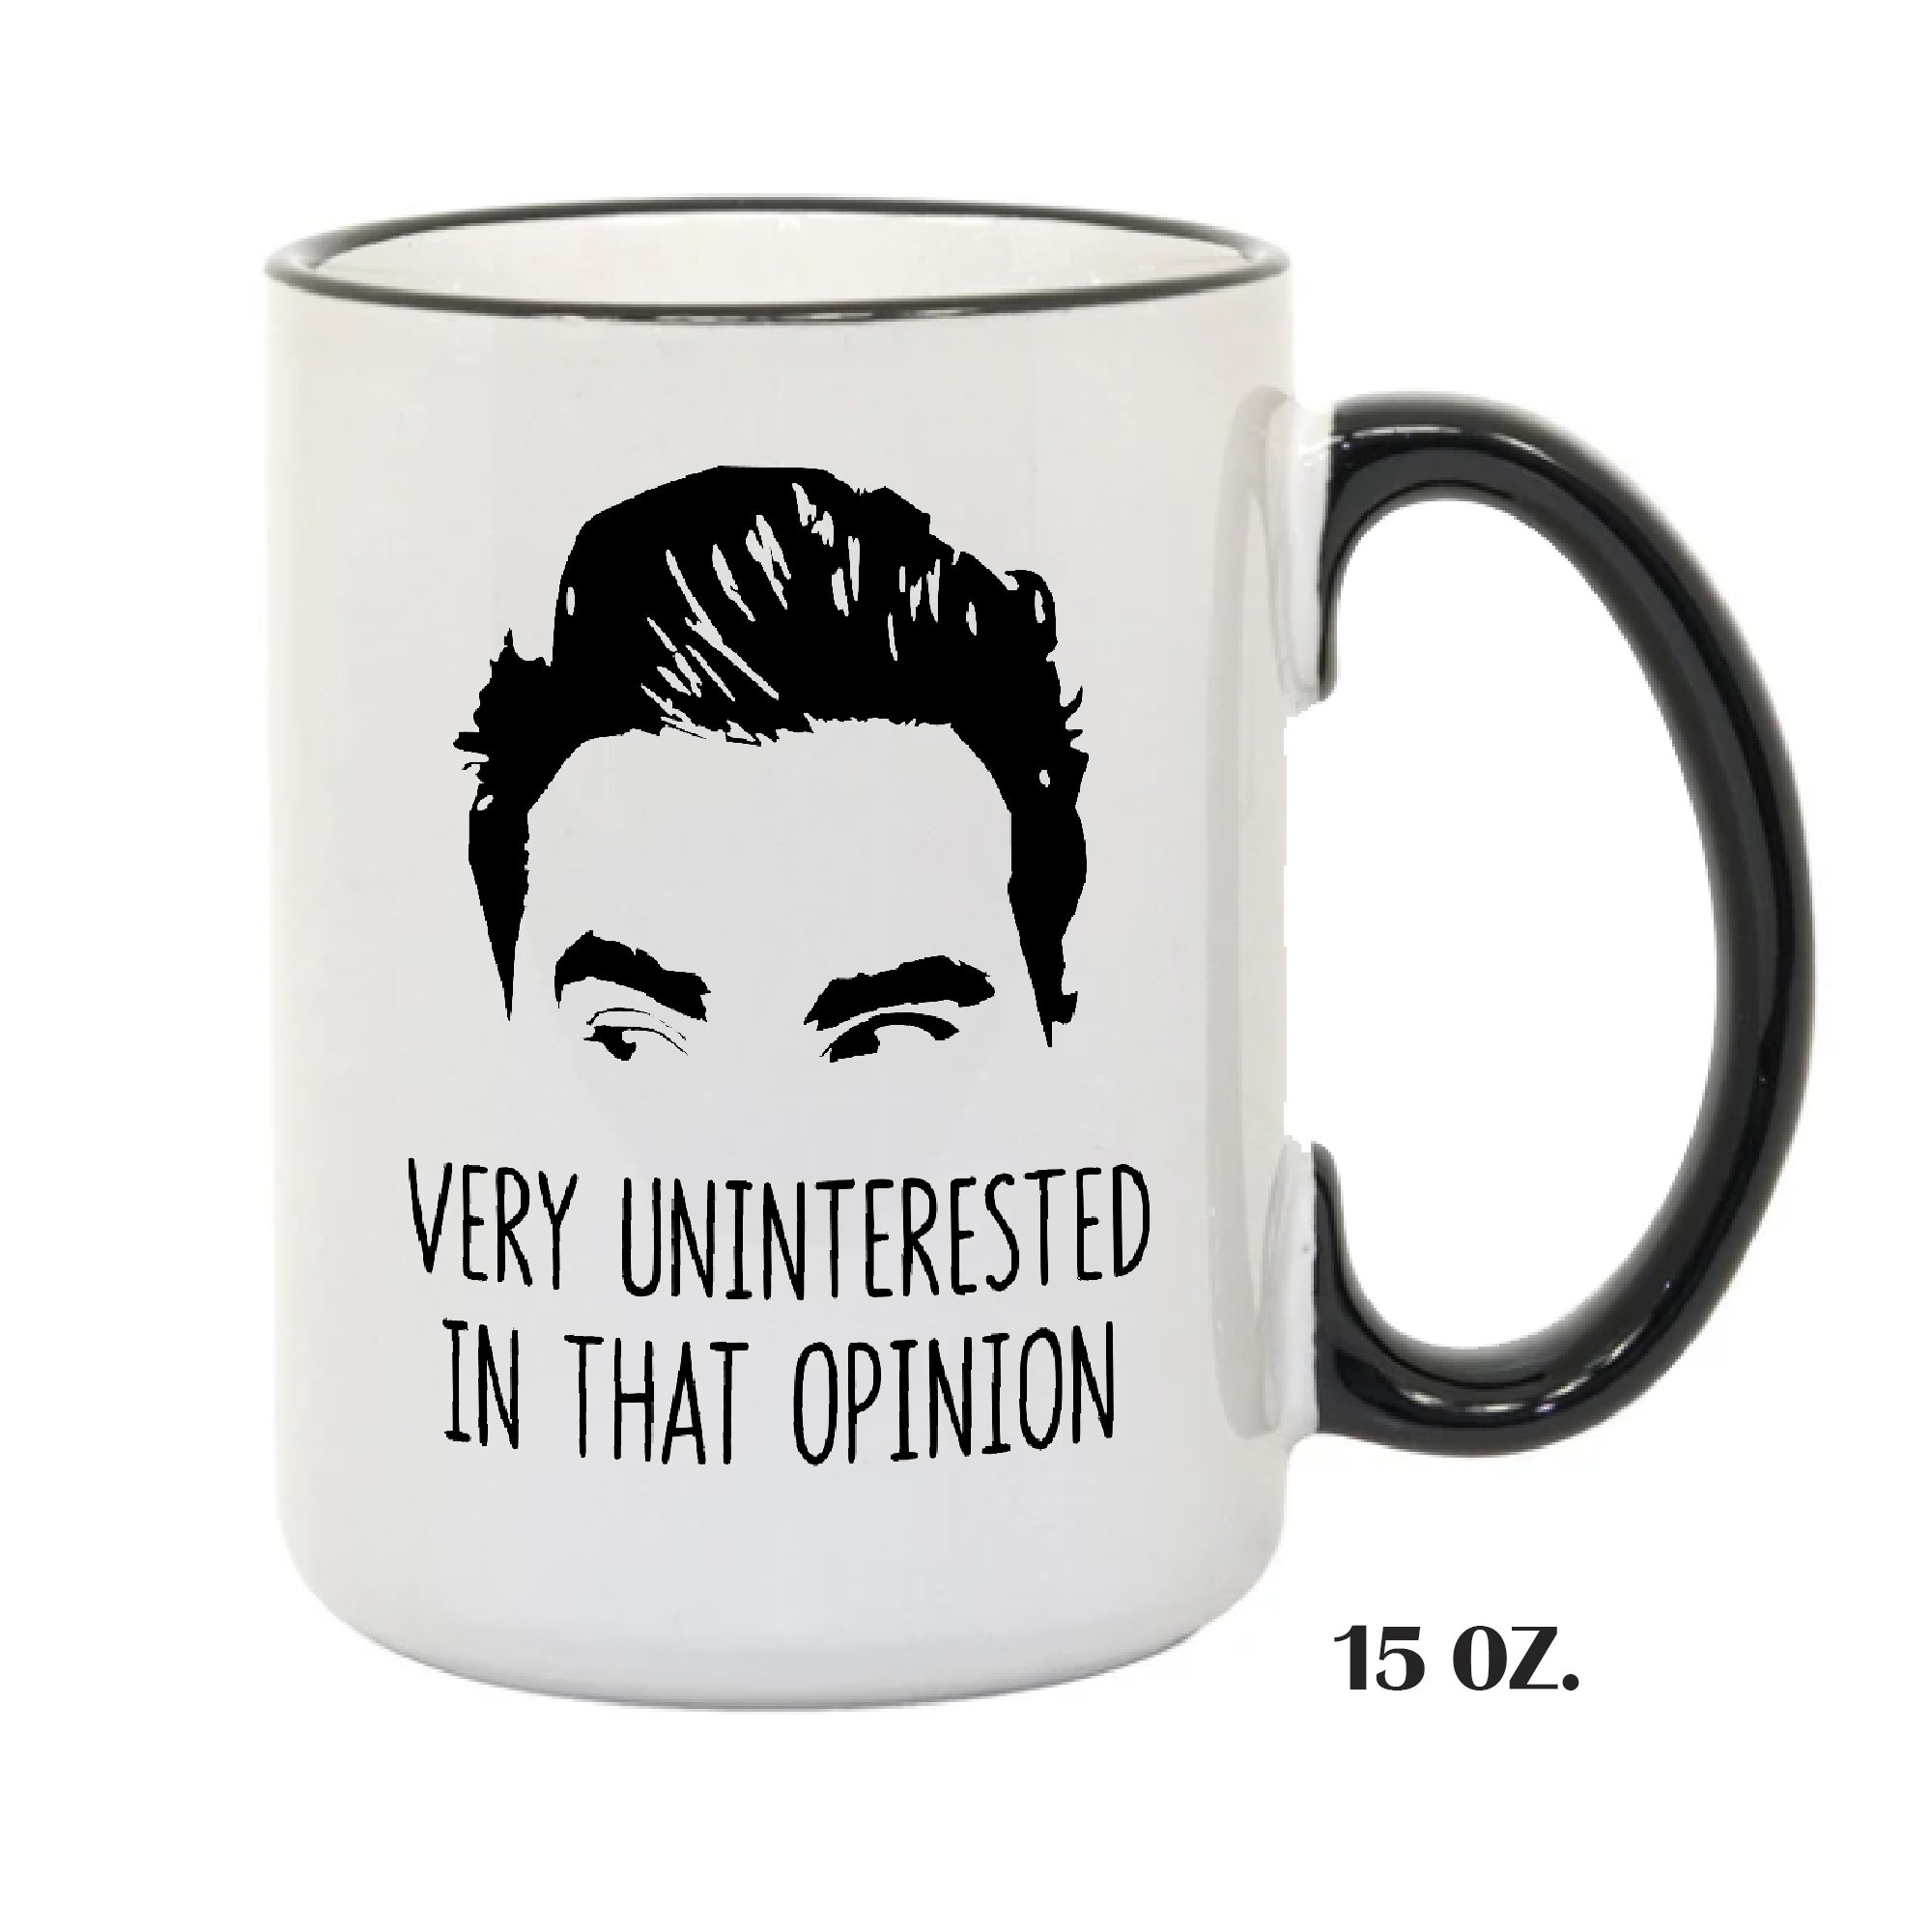 Uninterested in That Opinion Mugs David Rose's Favorite | Etsy